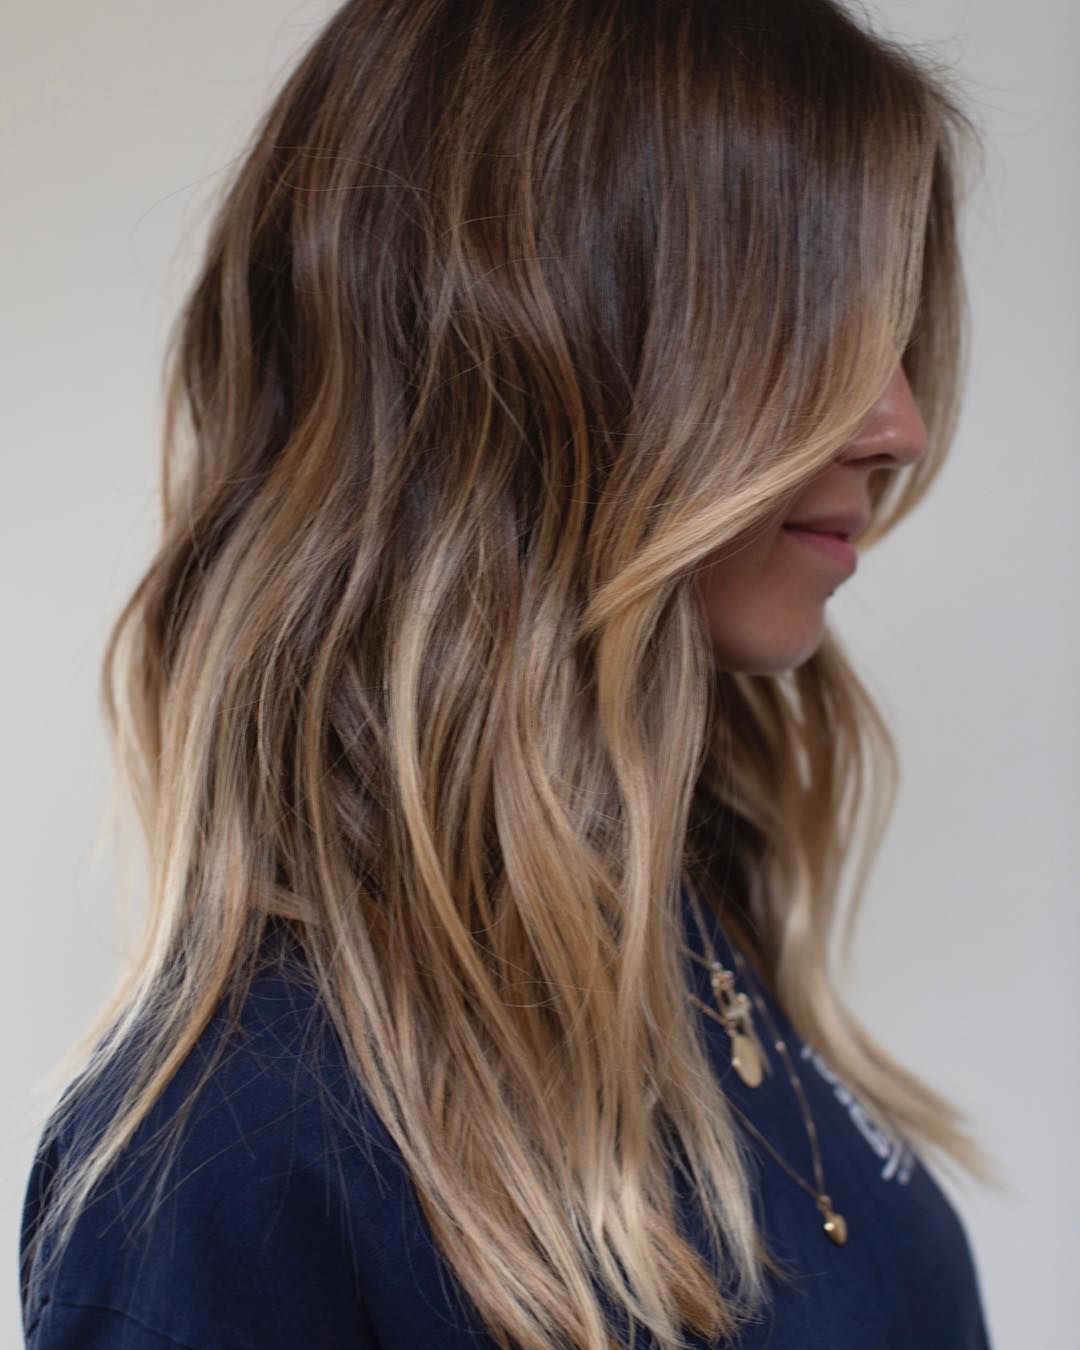 Embrace Effortless Chic with a Blonde
Balayage Hairstyle: Trendy and Stylish